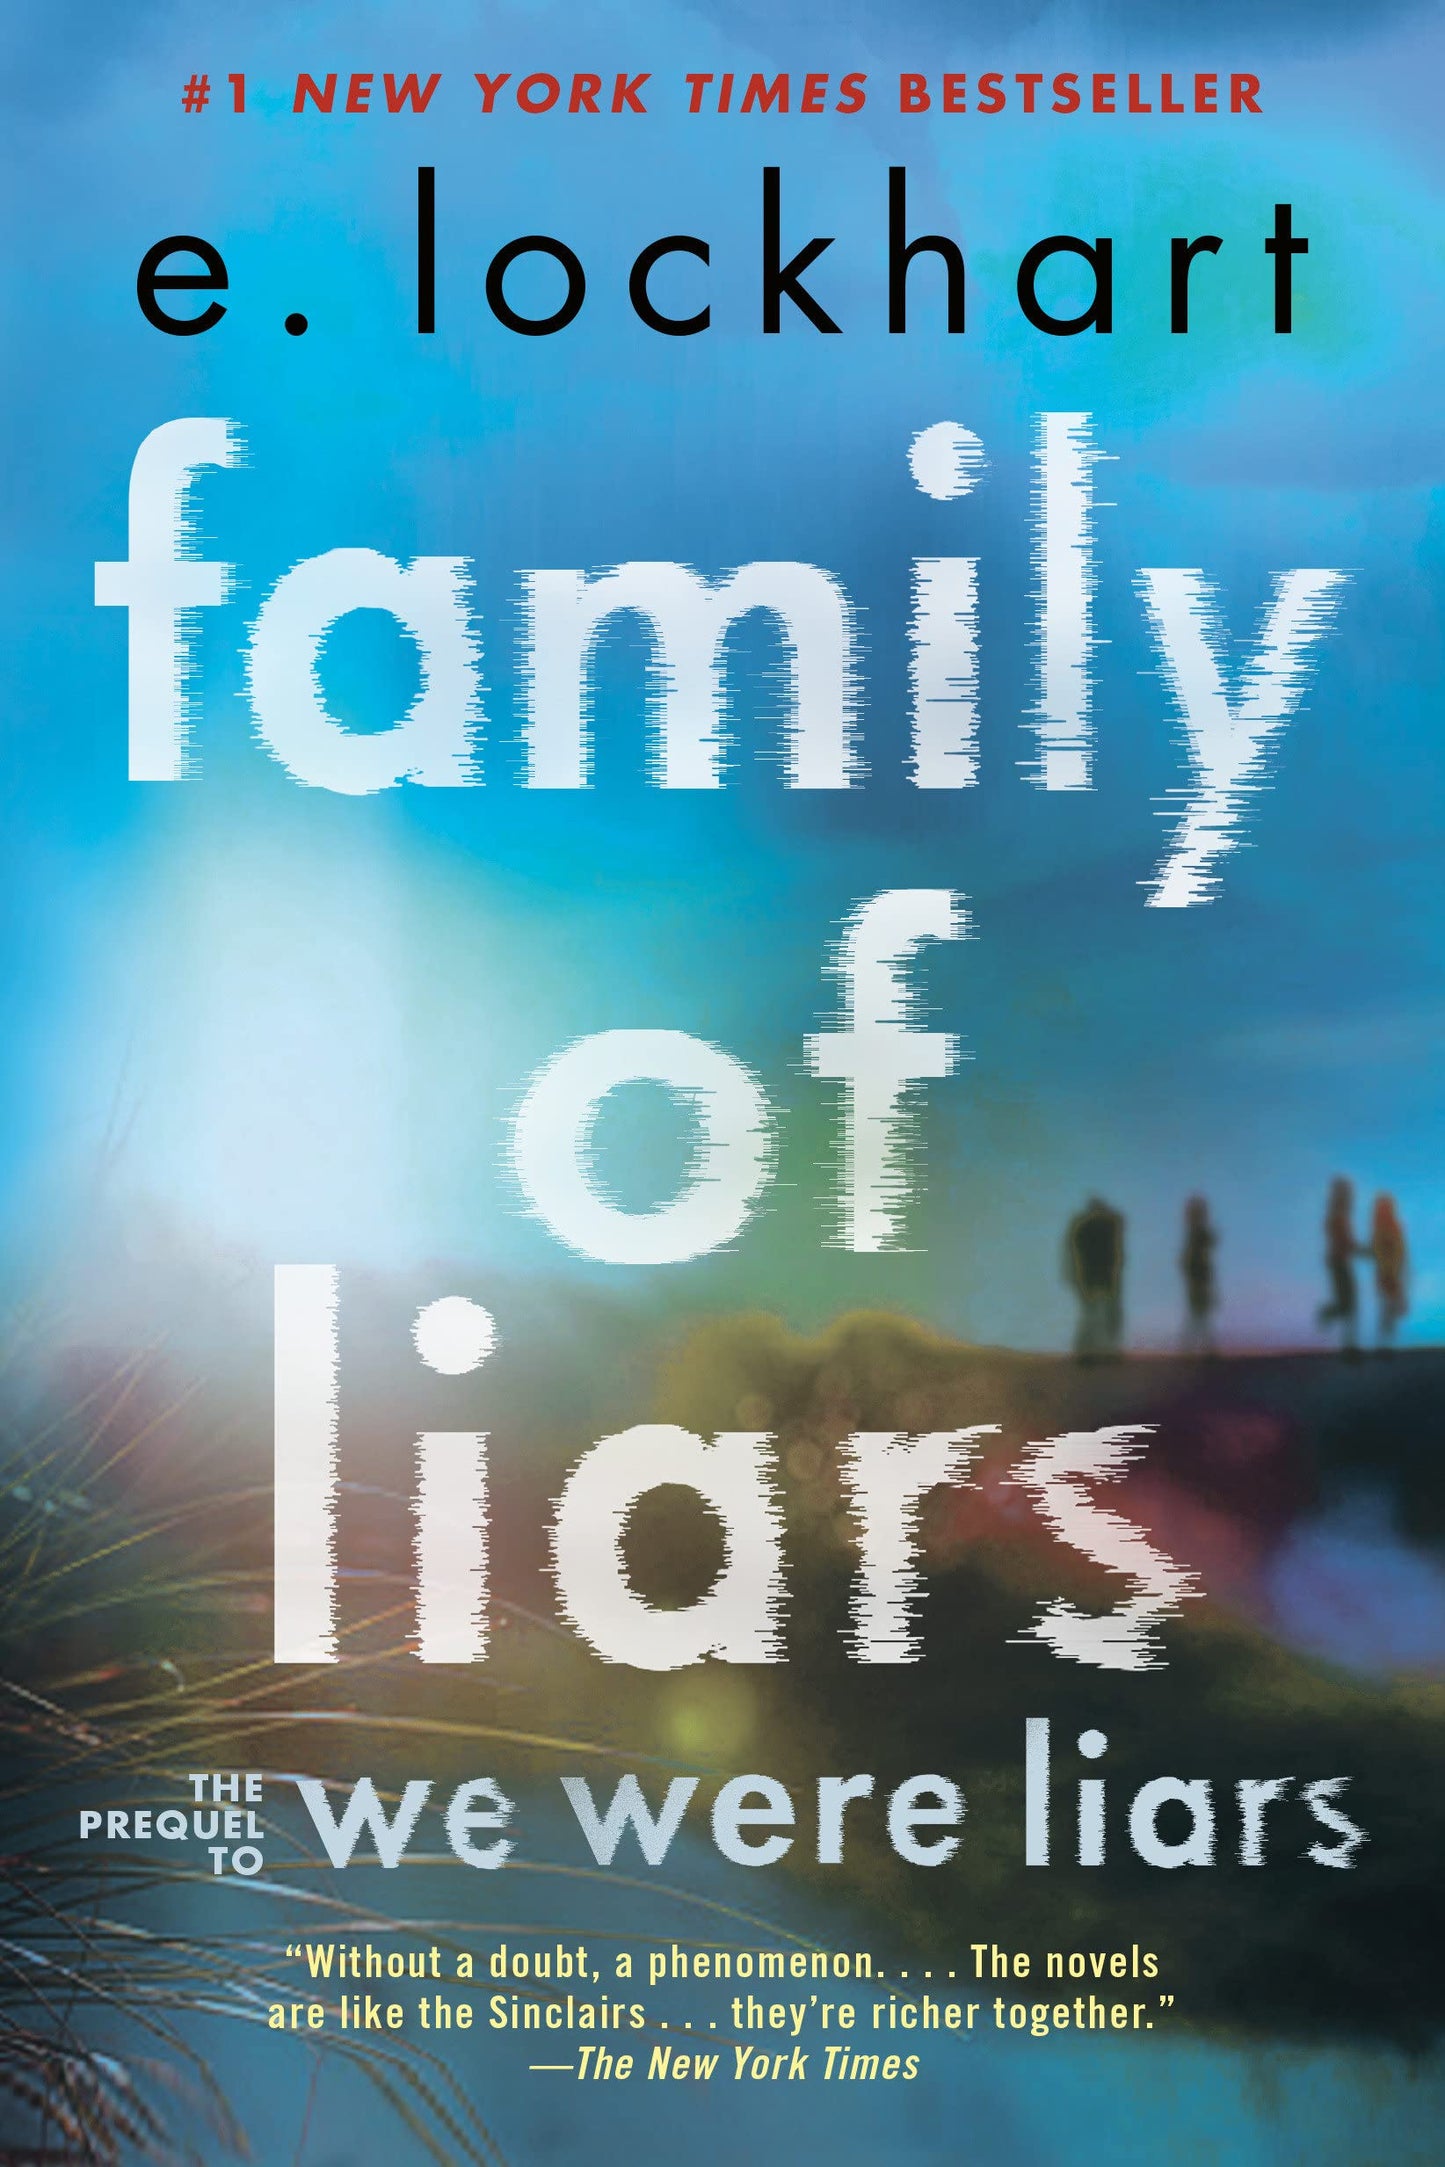 Family of Liars: The Prequel to We Were Liars